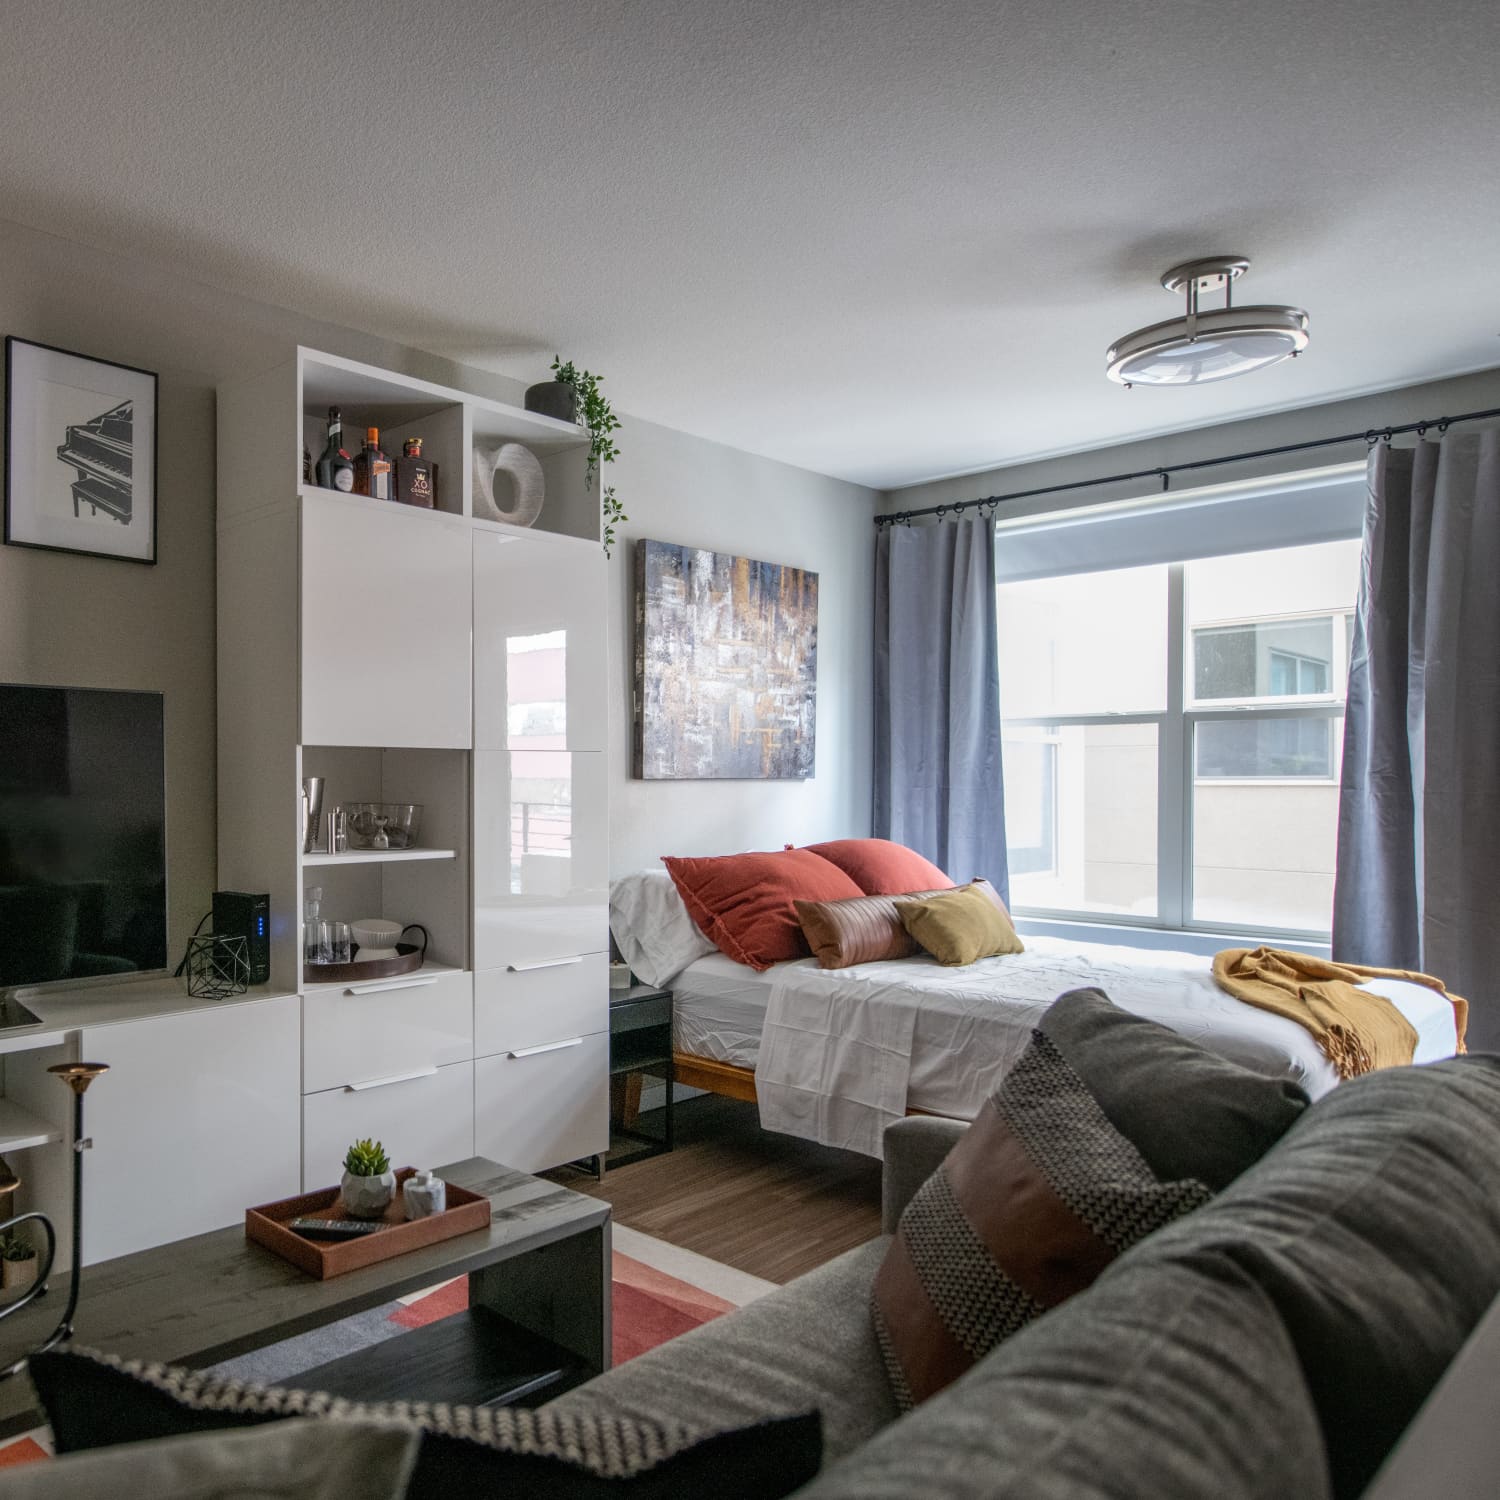 400-Square-Foot Studio Smart Layout And Vertical Storage | Apartment Therapy